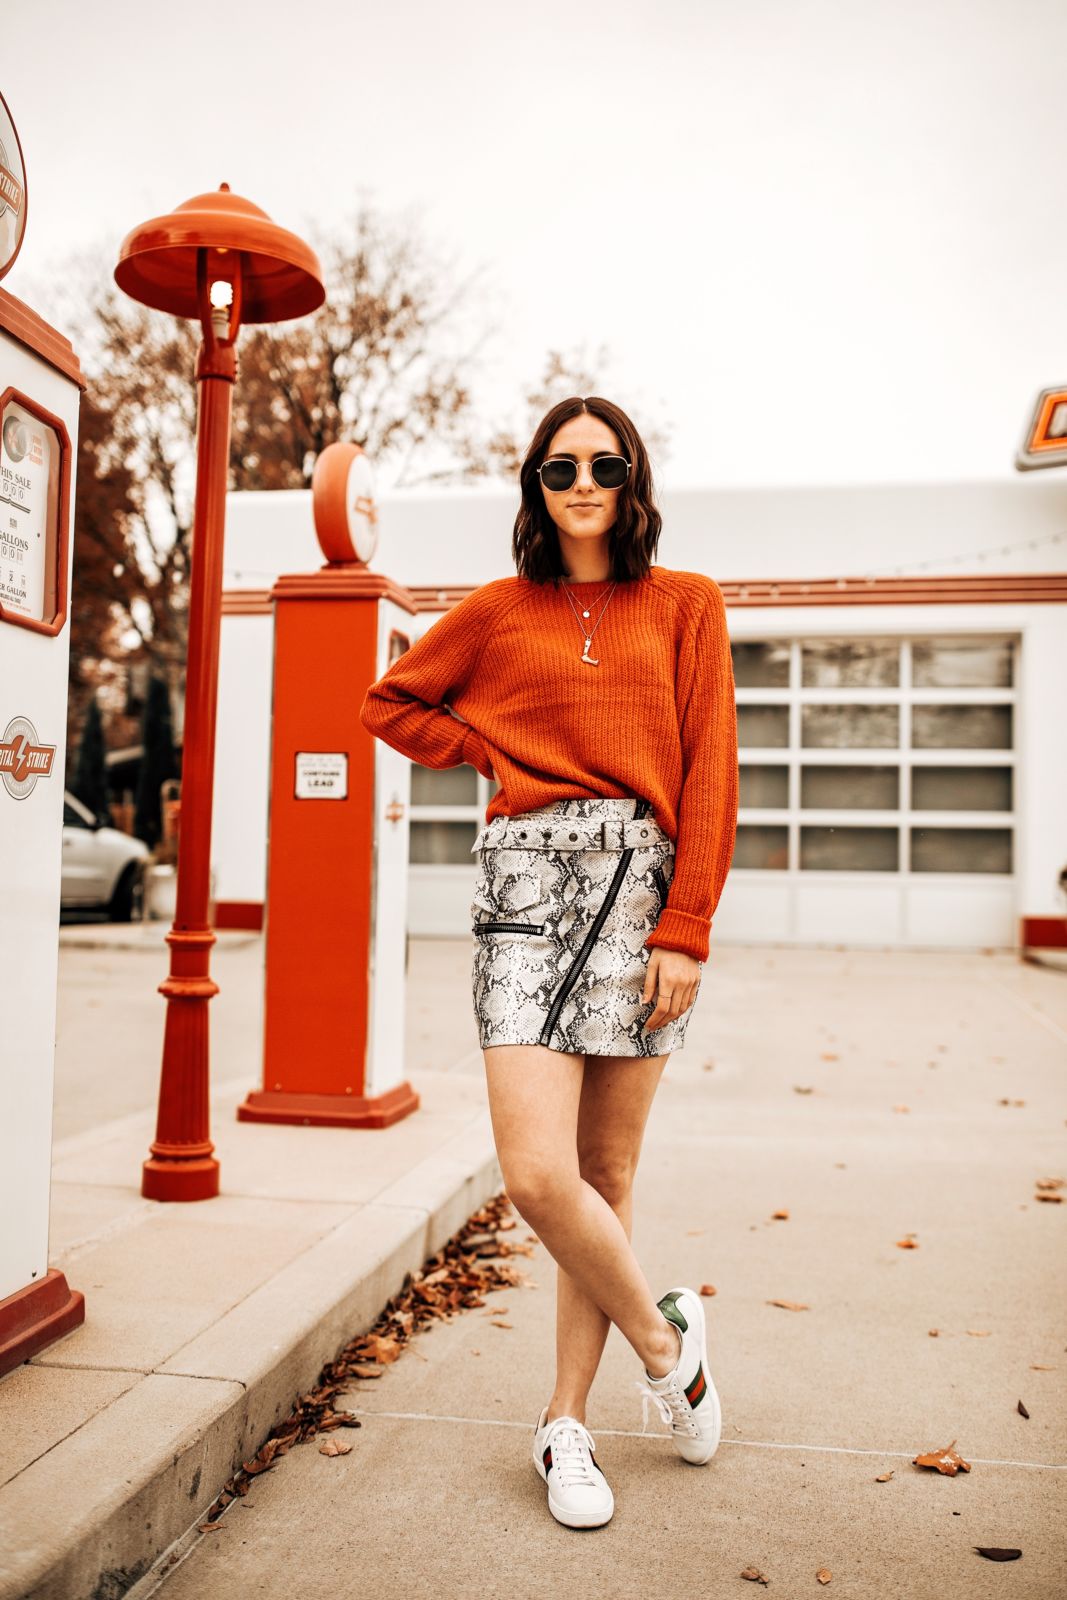 Snake Print Outfit - Clothing & Shoes | Oh Darling Blog